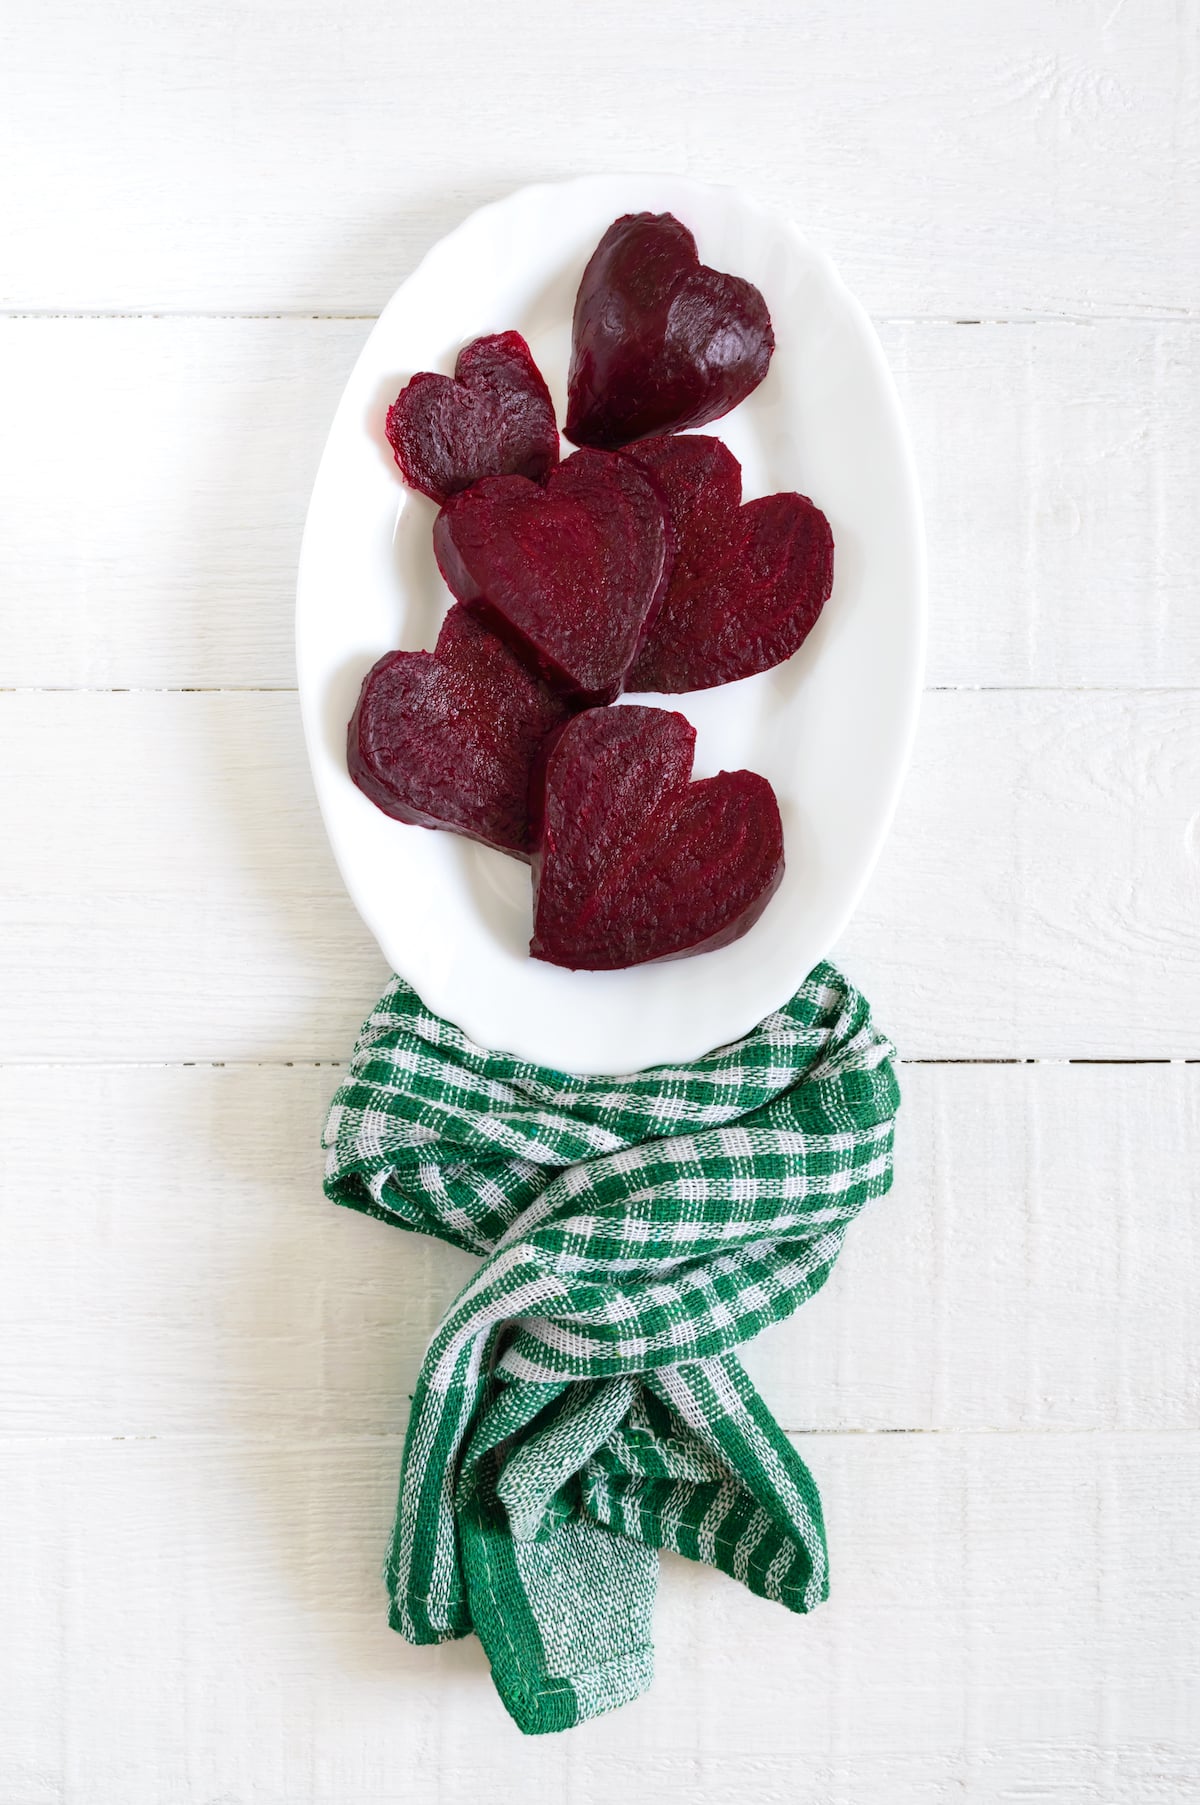 cooked instant pot beets cut into hearts.